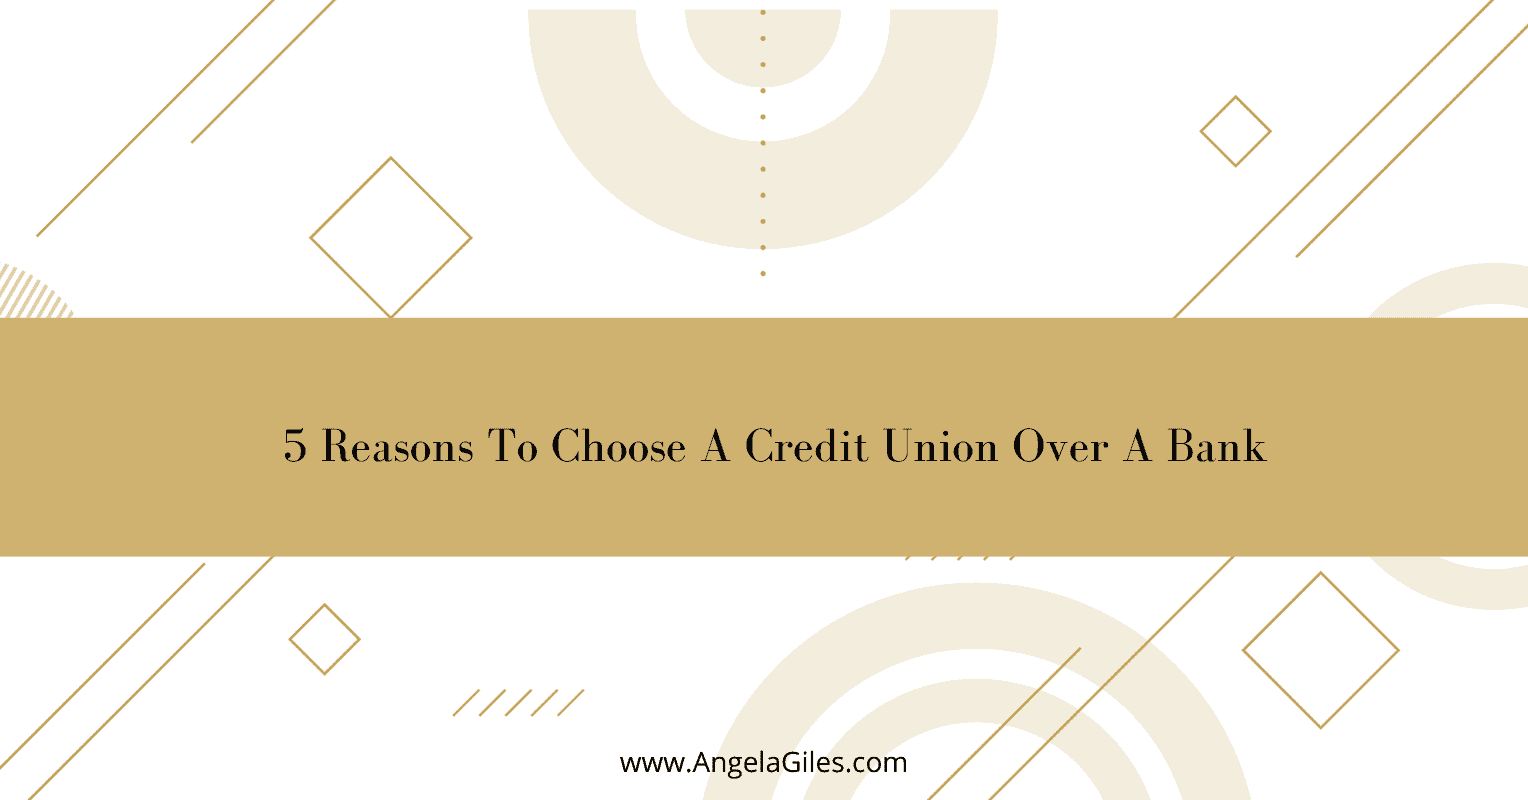 5 Reasons to Choose a Credit Union Over a Bank 